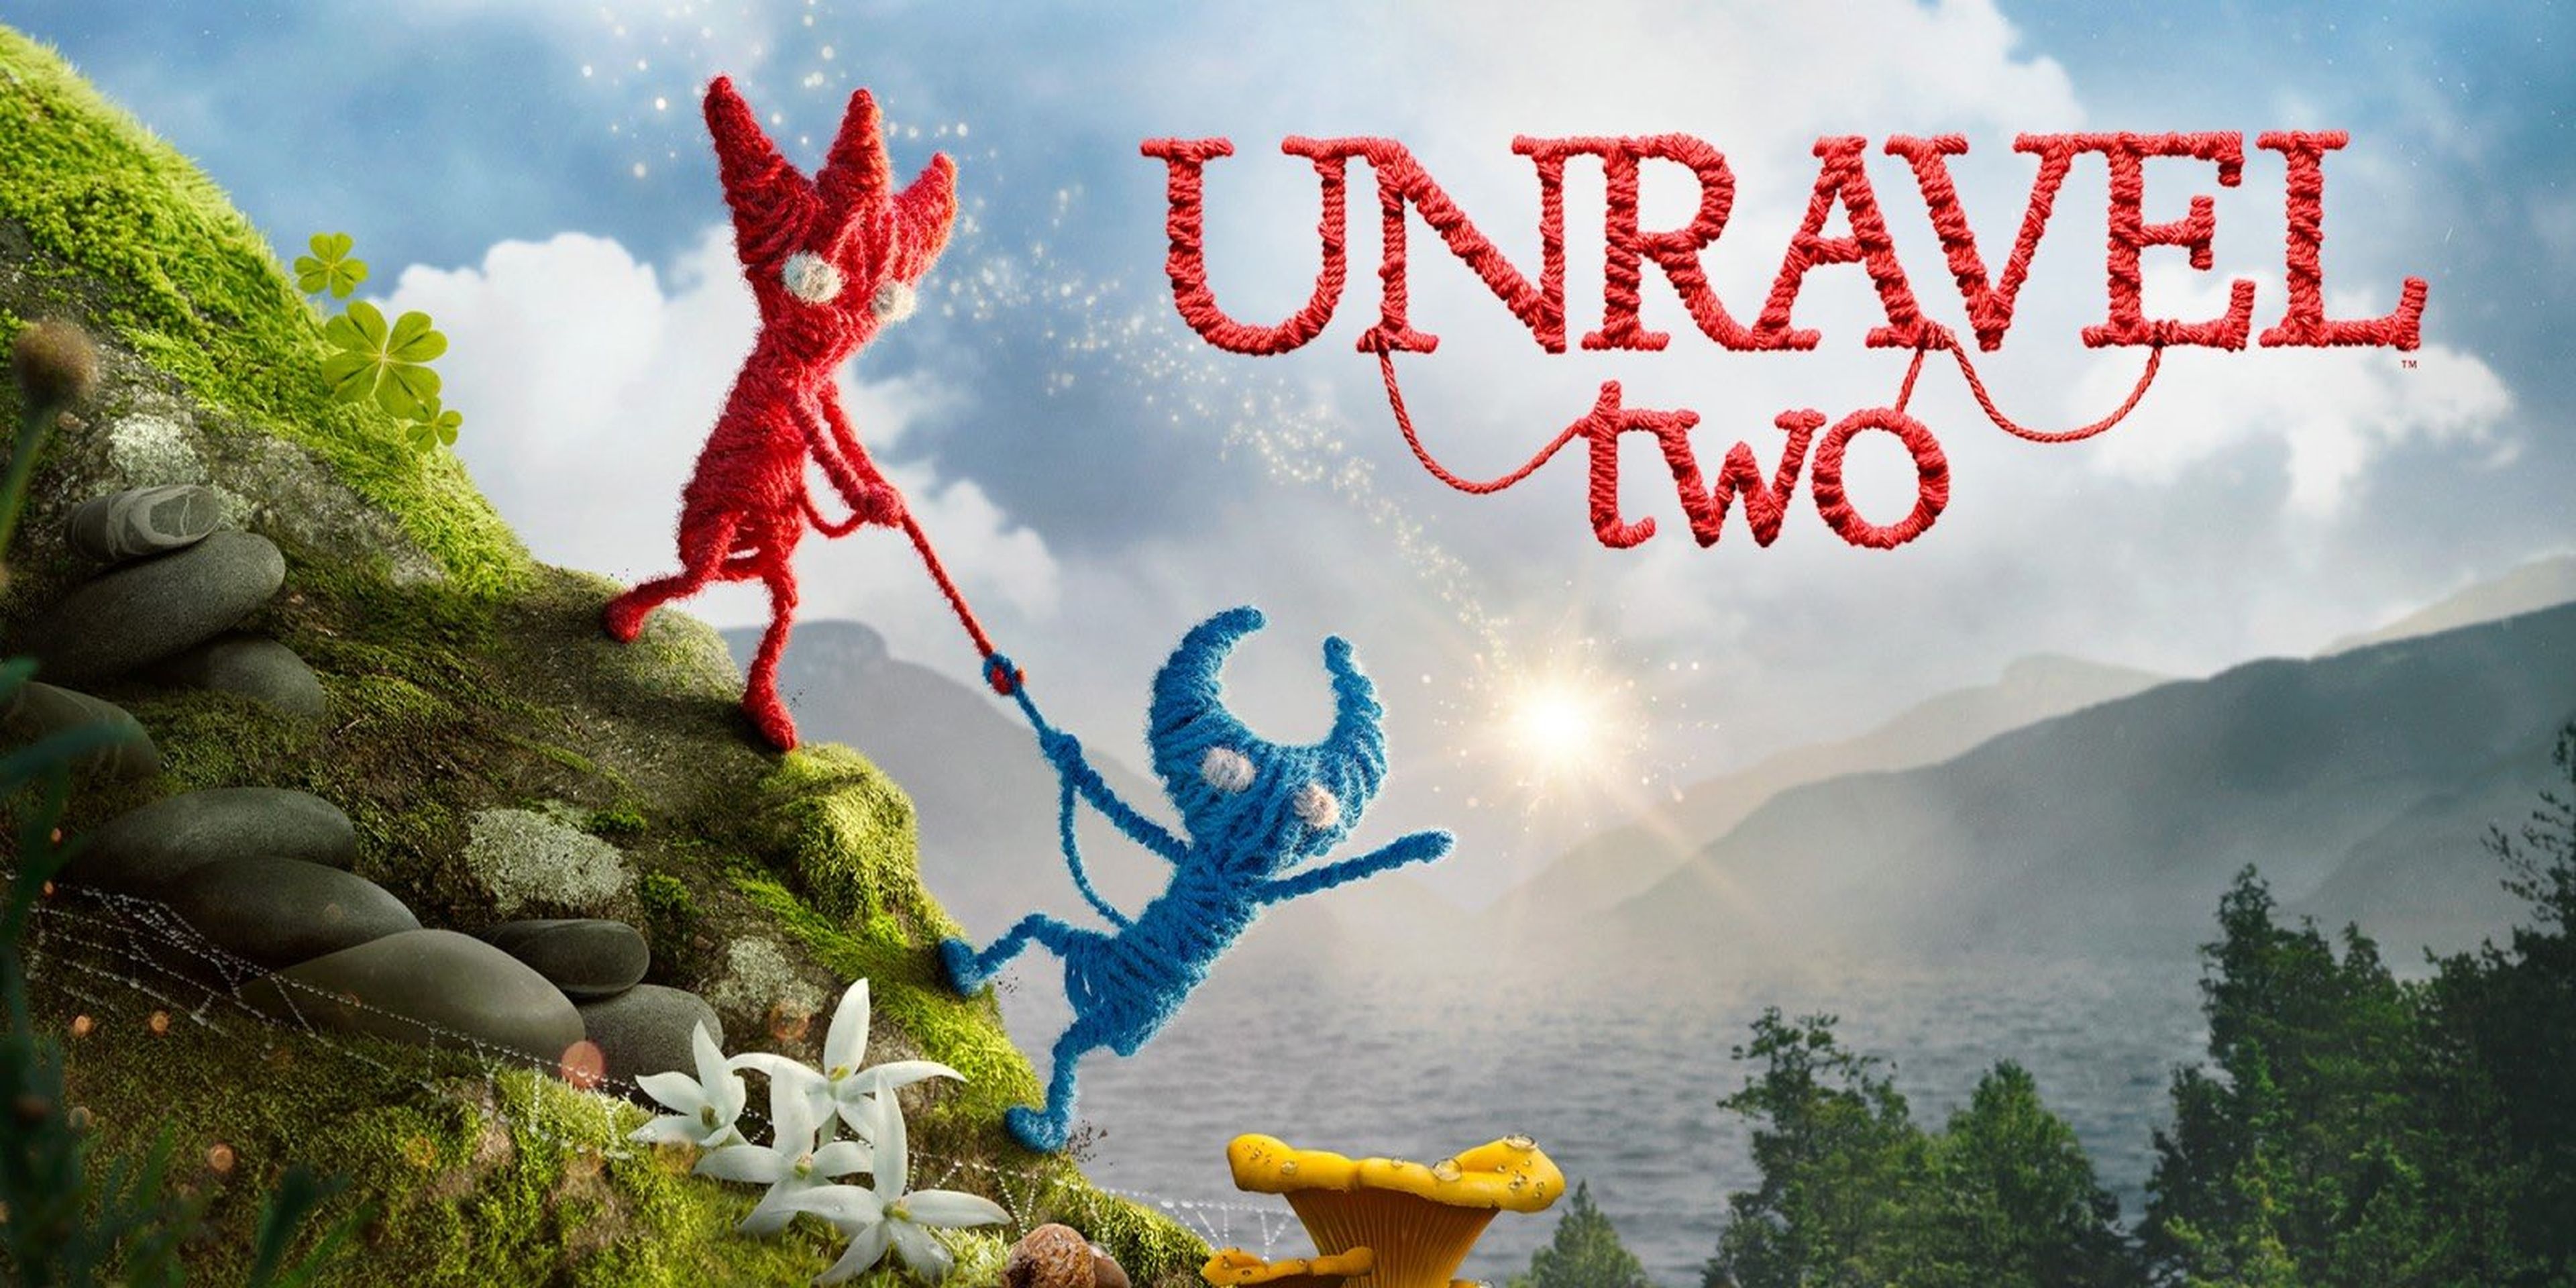 Unravel Two switch